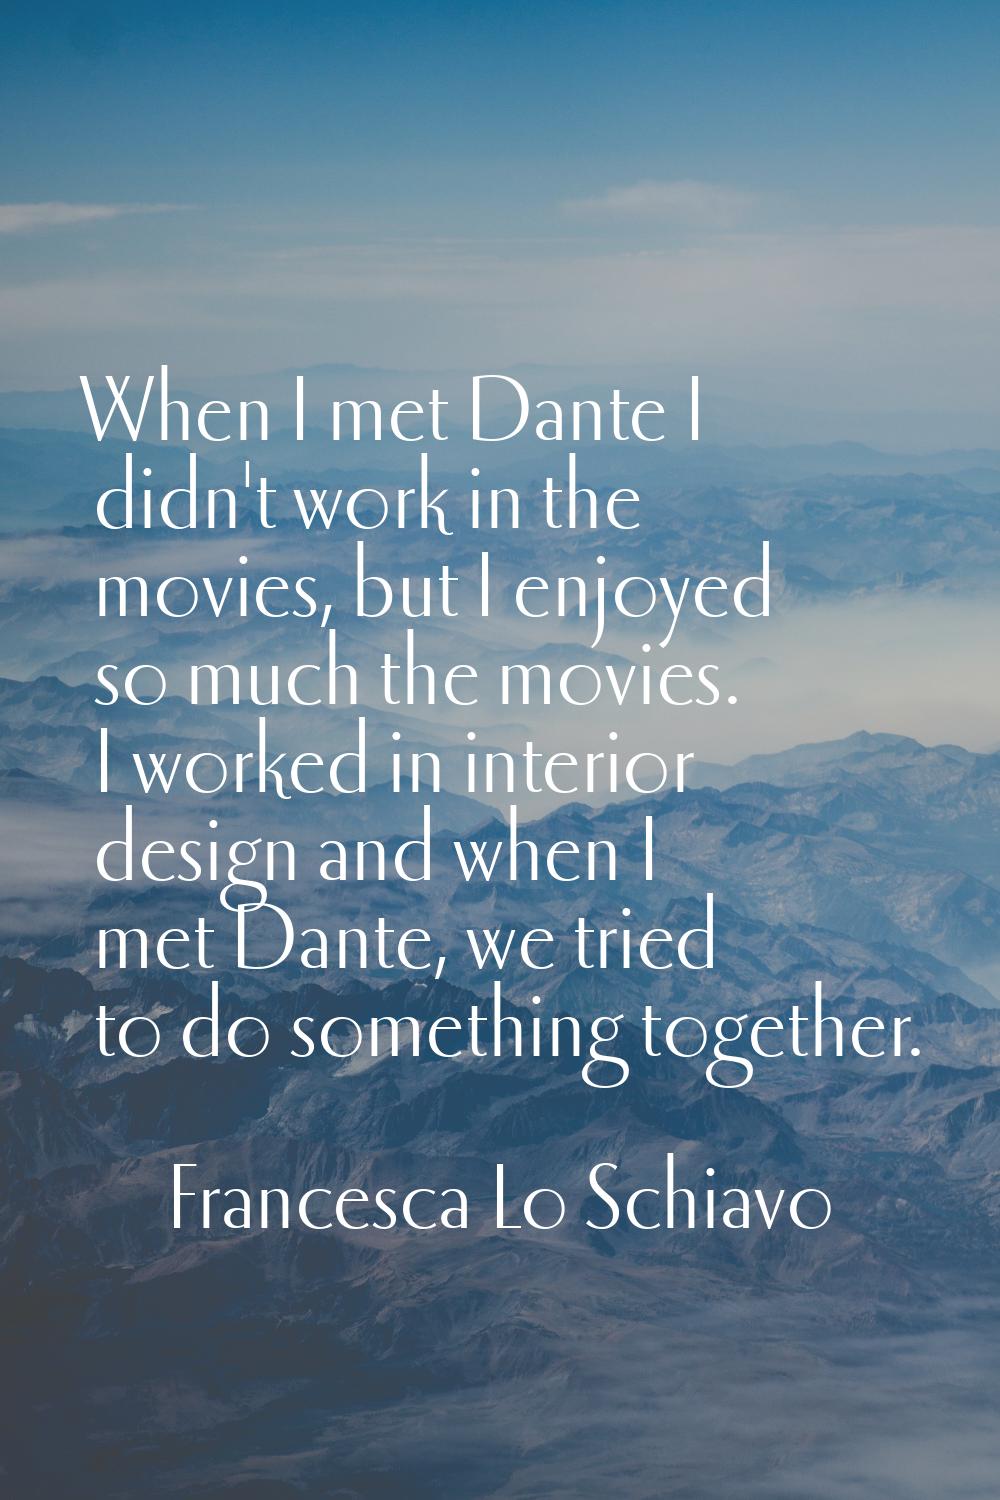 When I met Dante I didn't work in the movies, but I enjoyed so much the movies. I worked in interio